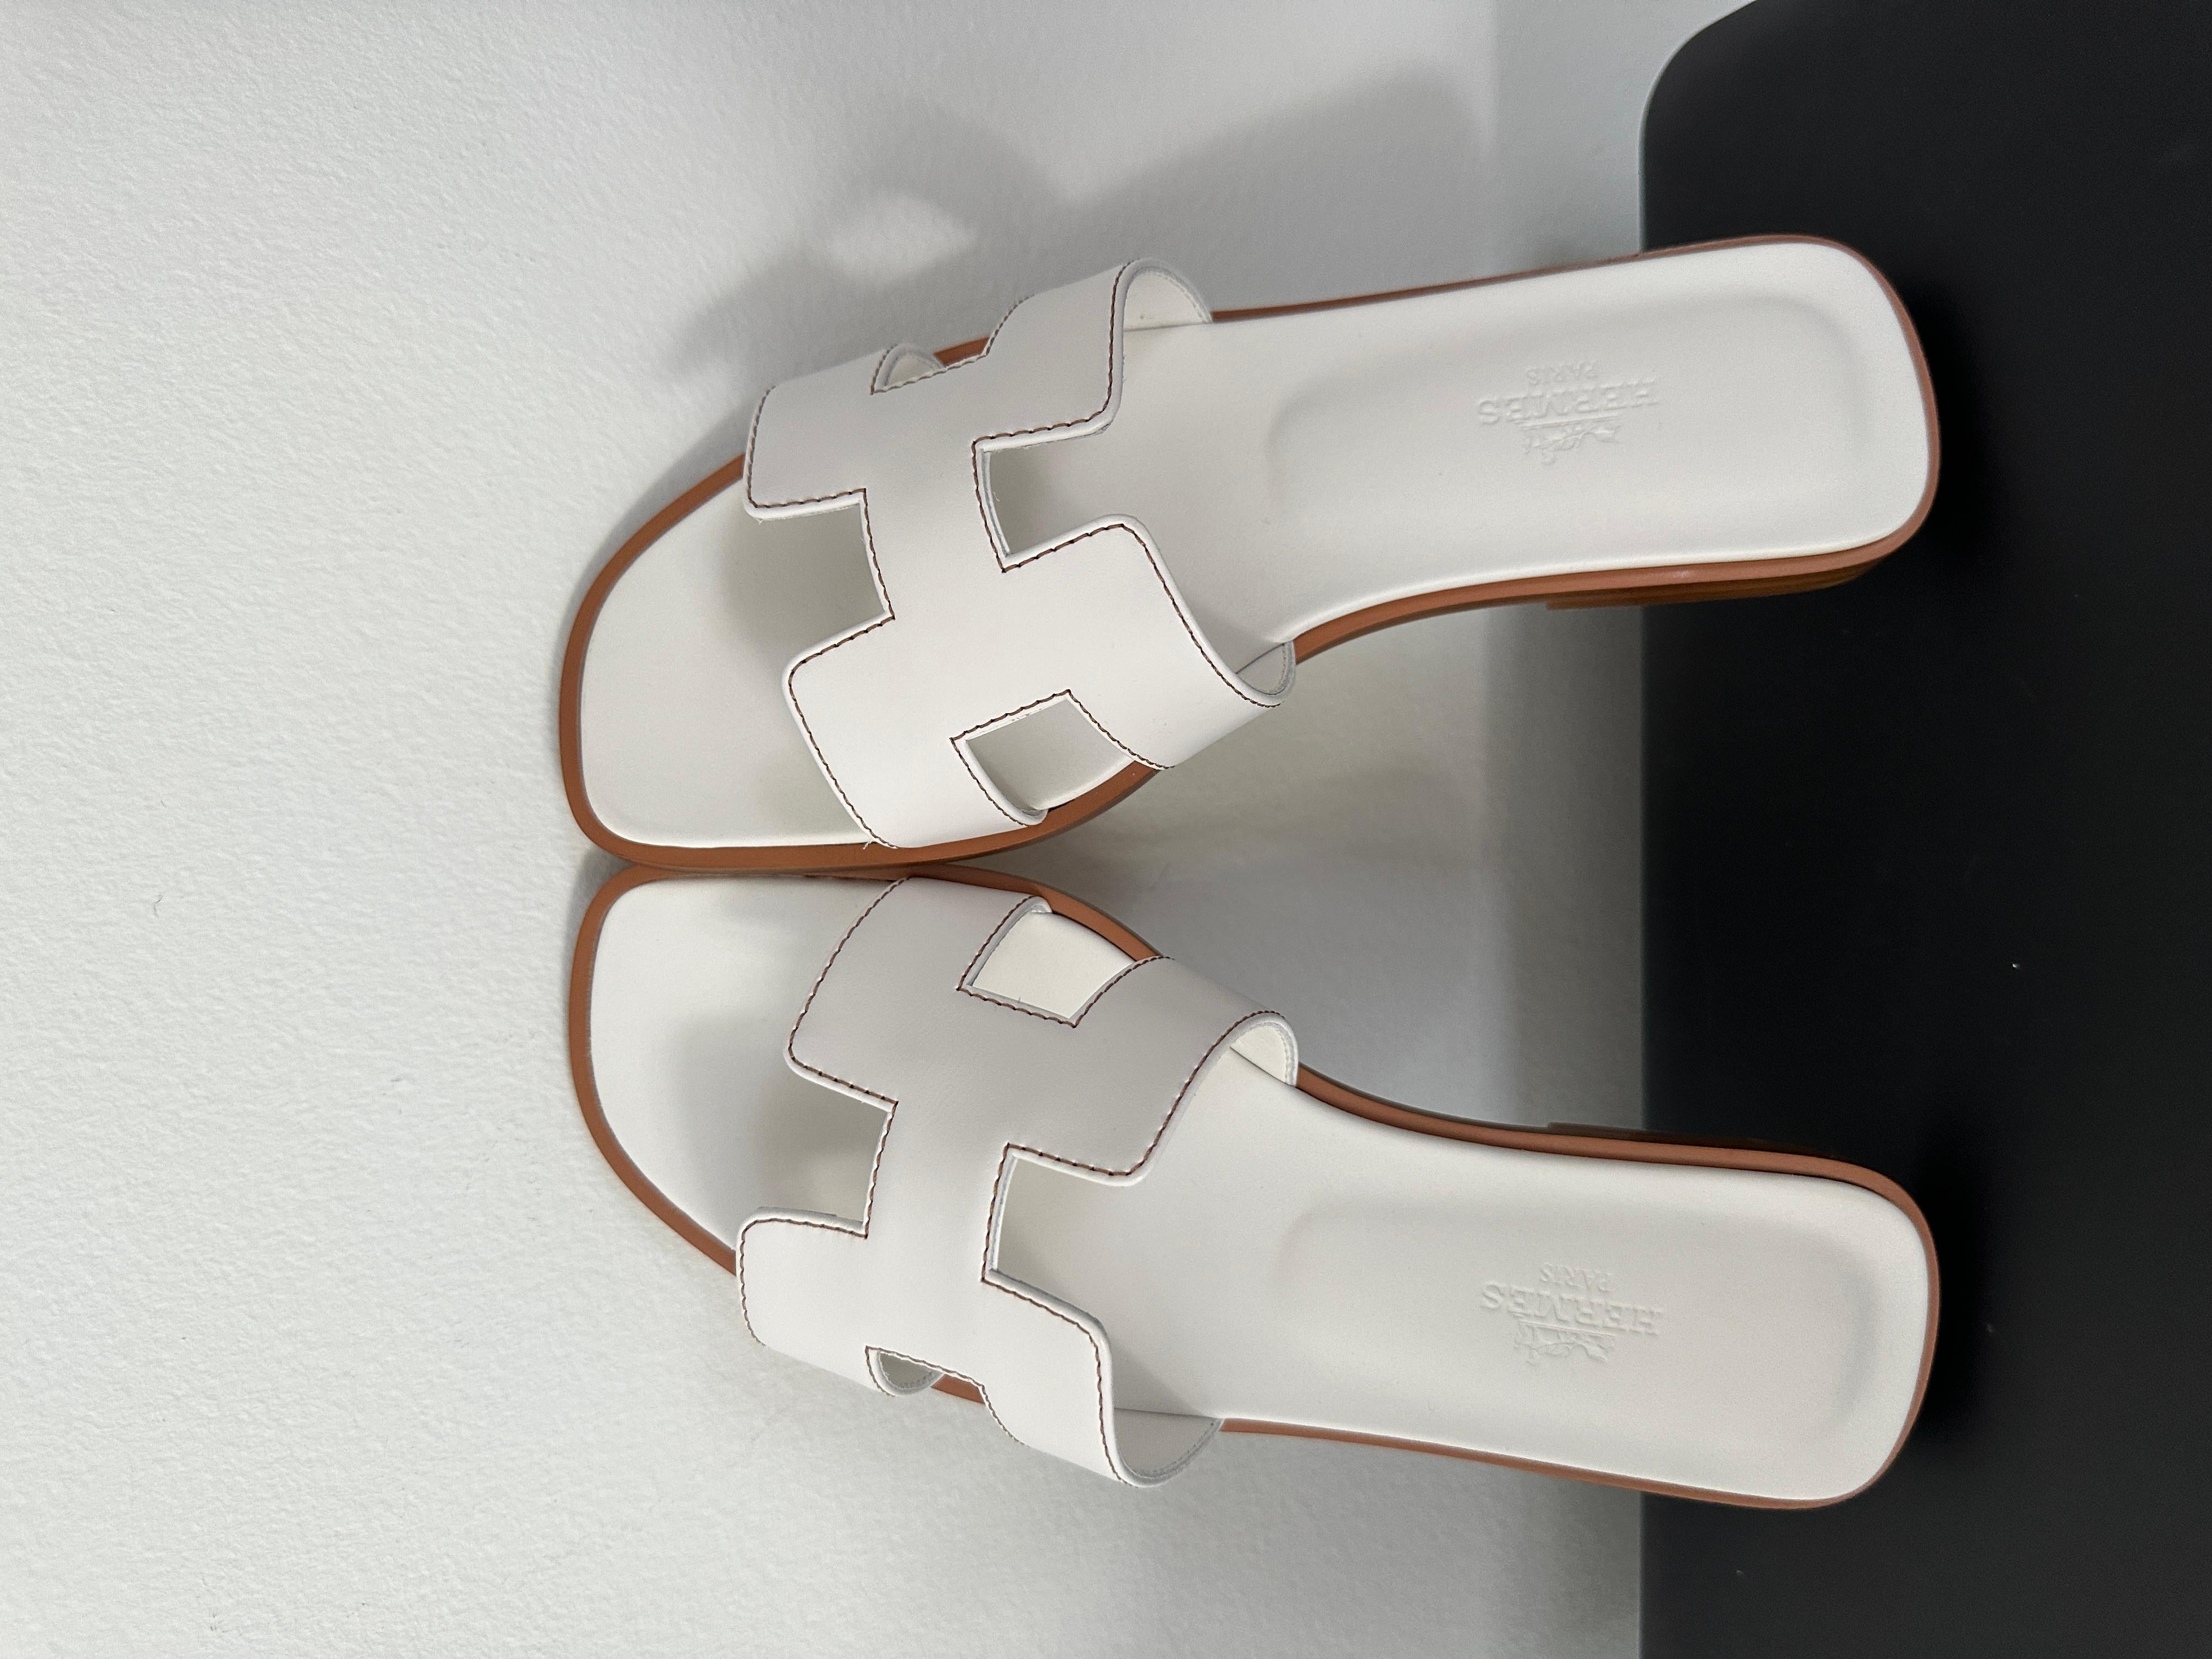 The  Oran Sandal 
About the Oran sandal:
Hermes Oran is a style of sandal produced by the luxury fashion brand Hermes. The sandal features a simple, minimalist design, with a leather  upper and a flat sole. The Oran is available in a range of colors